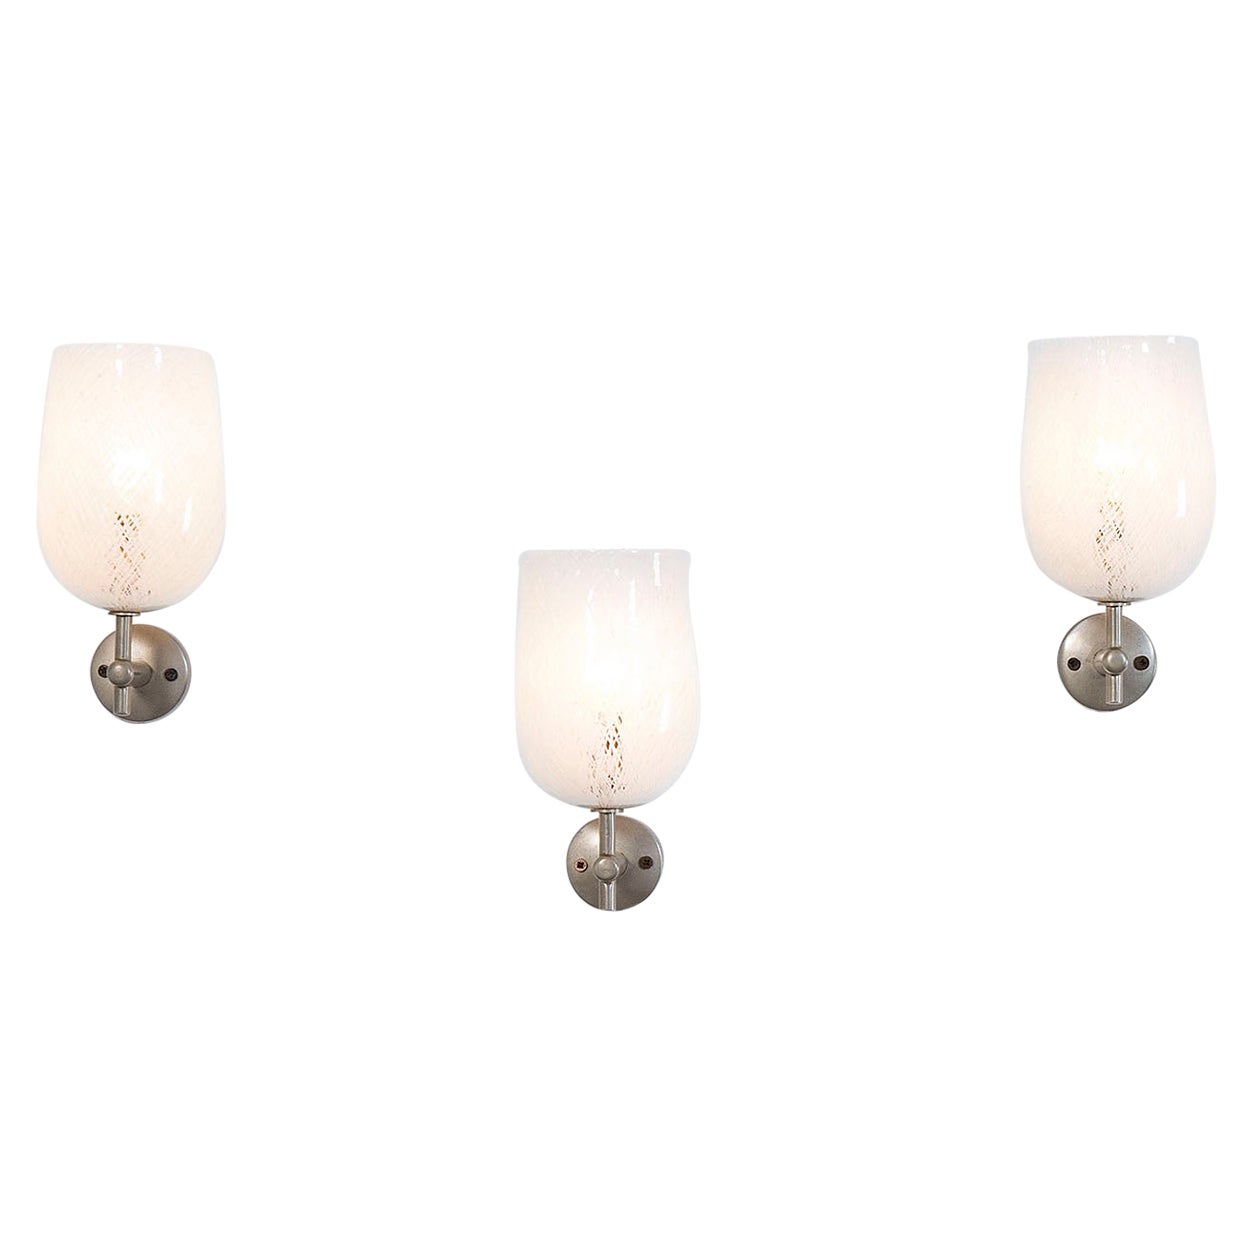 20th Century Venini Set of Three Wall Lamps in Murano Glass and Chrome, 50s For Sale